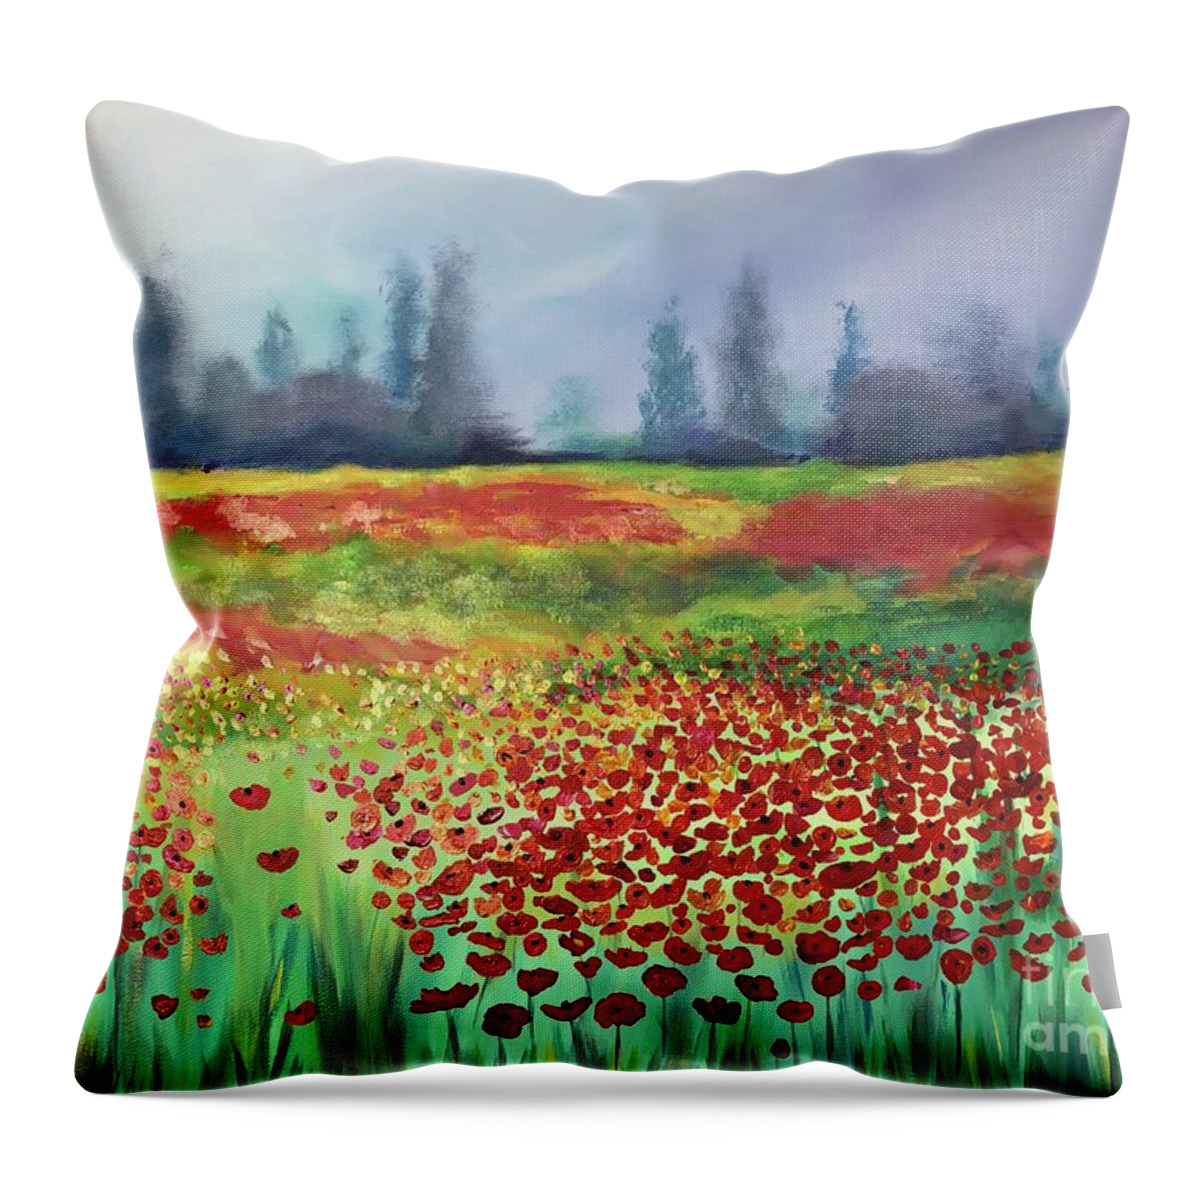 Valentine’s Day Throw Pillow featuring the painting Blooming Romance by Stacey Zimmerman